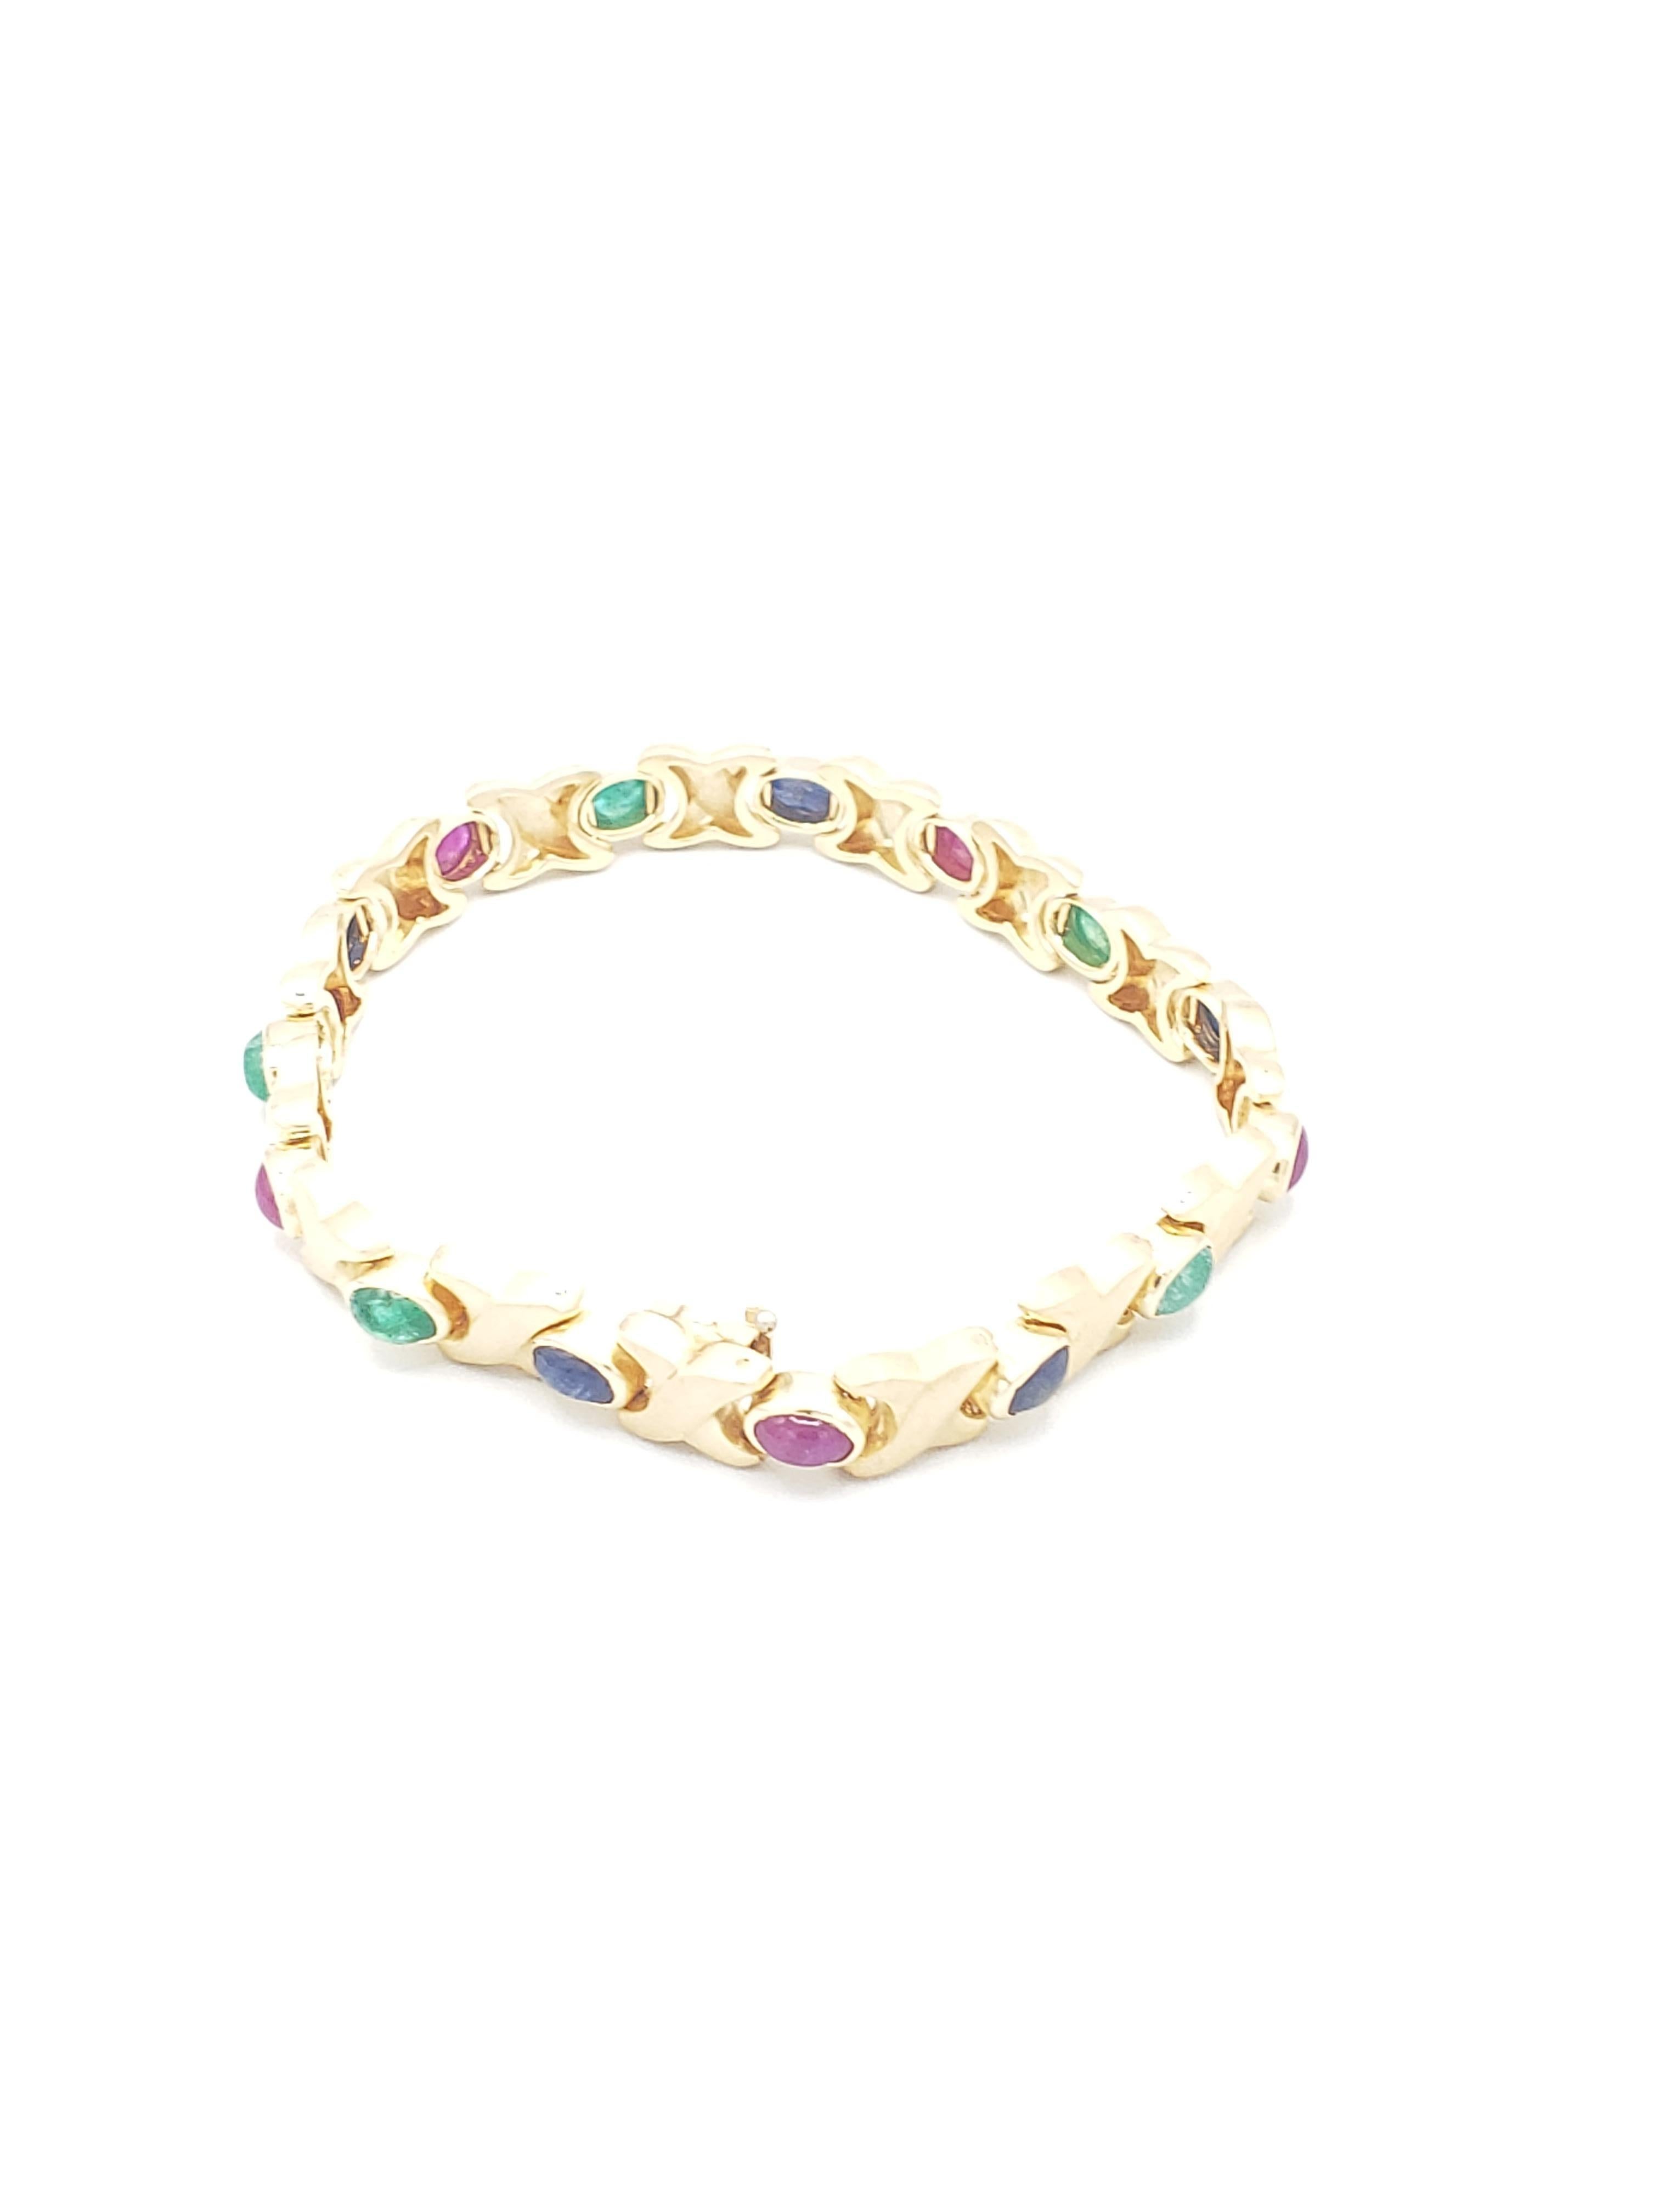 Byzantine NEW Natural Ruby, Sapphire, Emerald Bracelet in 14k Solid Yellow Gold New For Sale